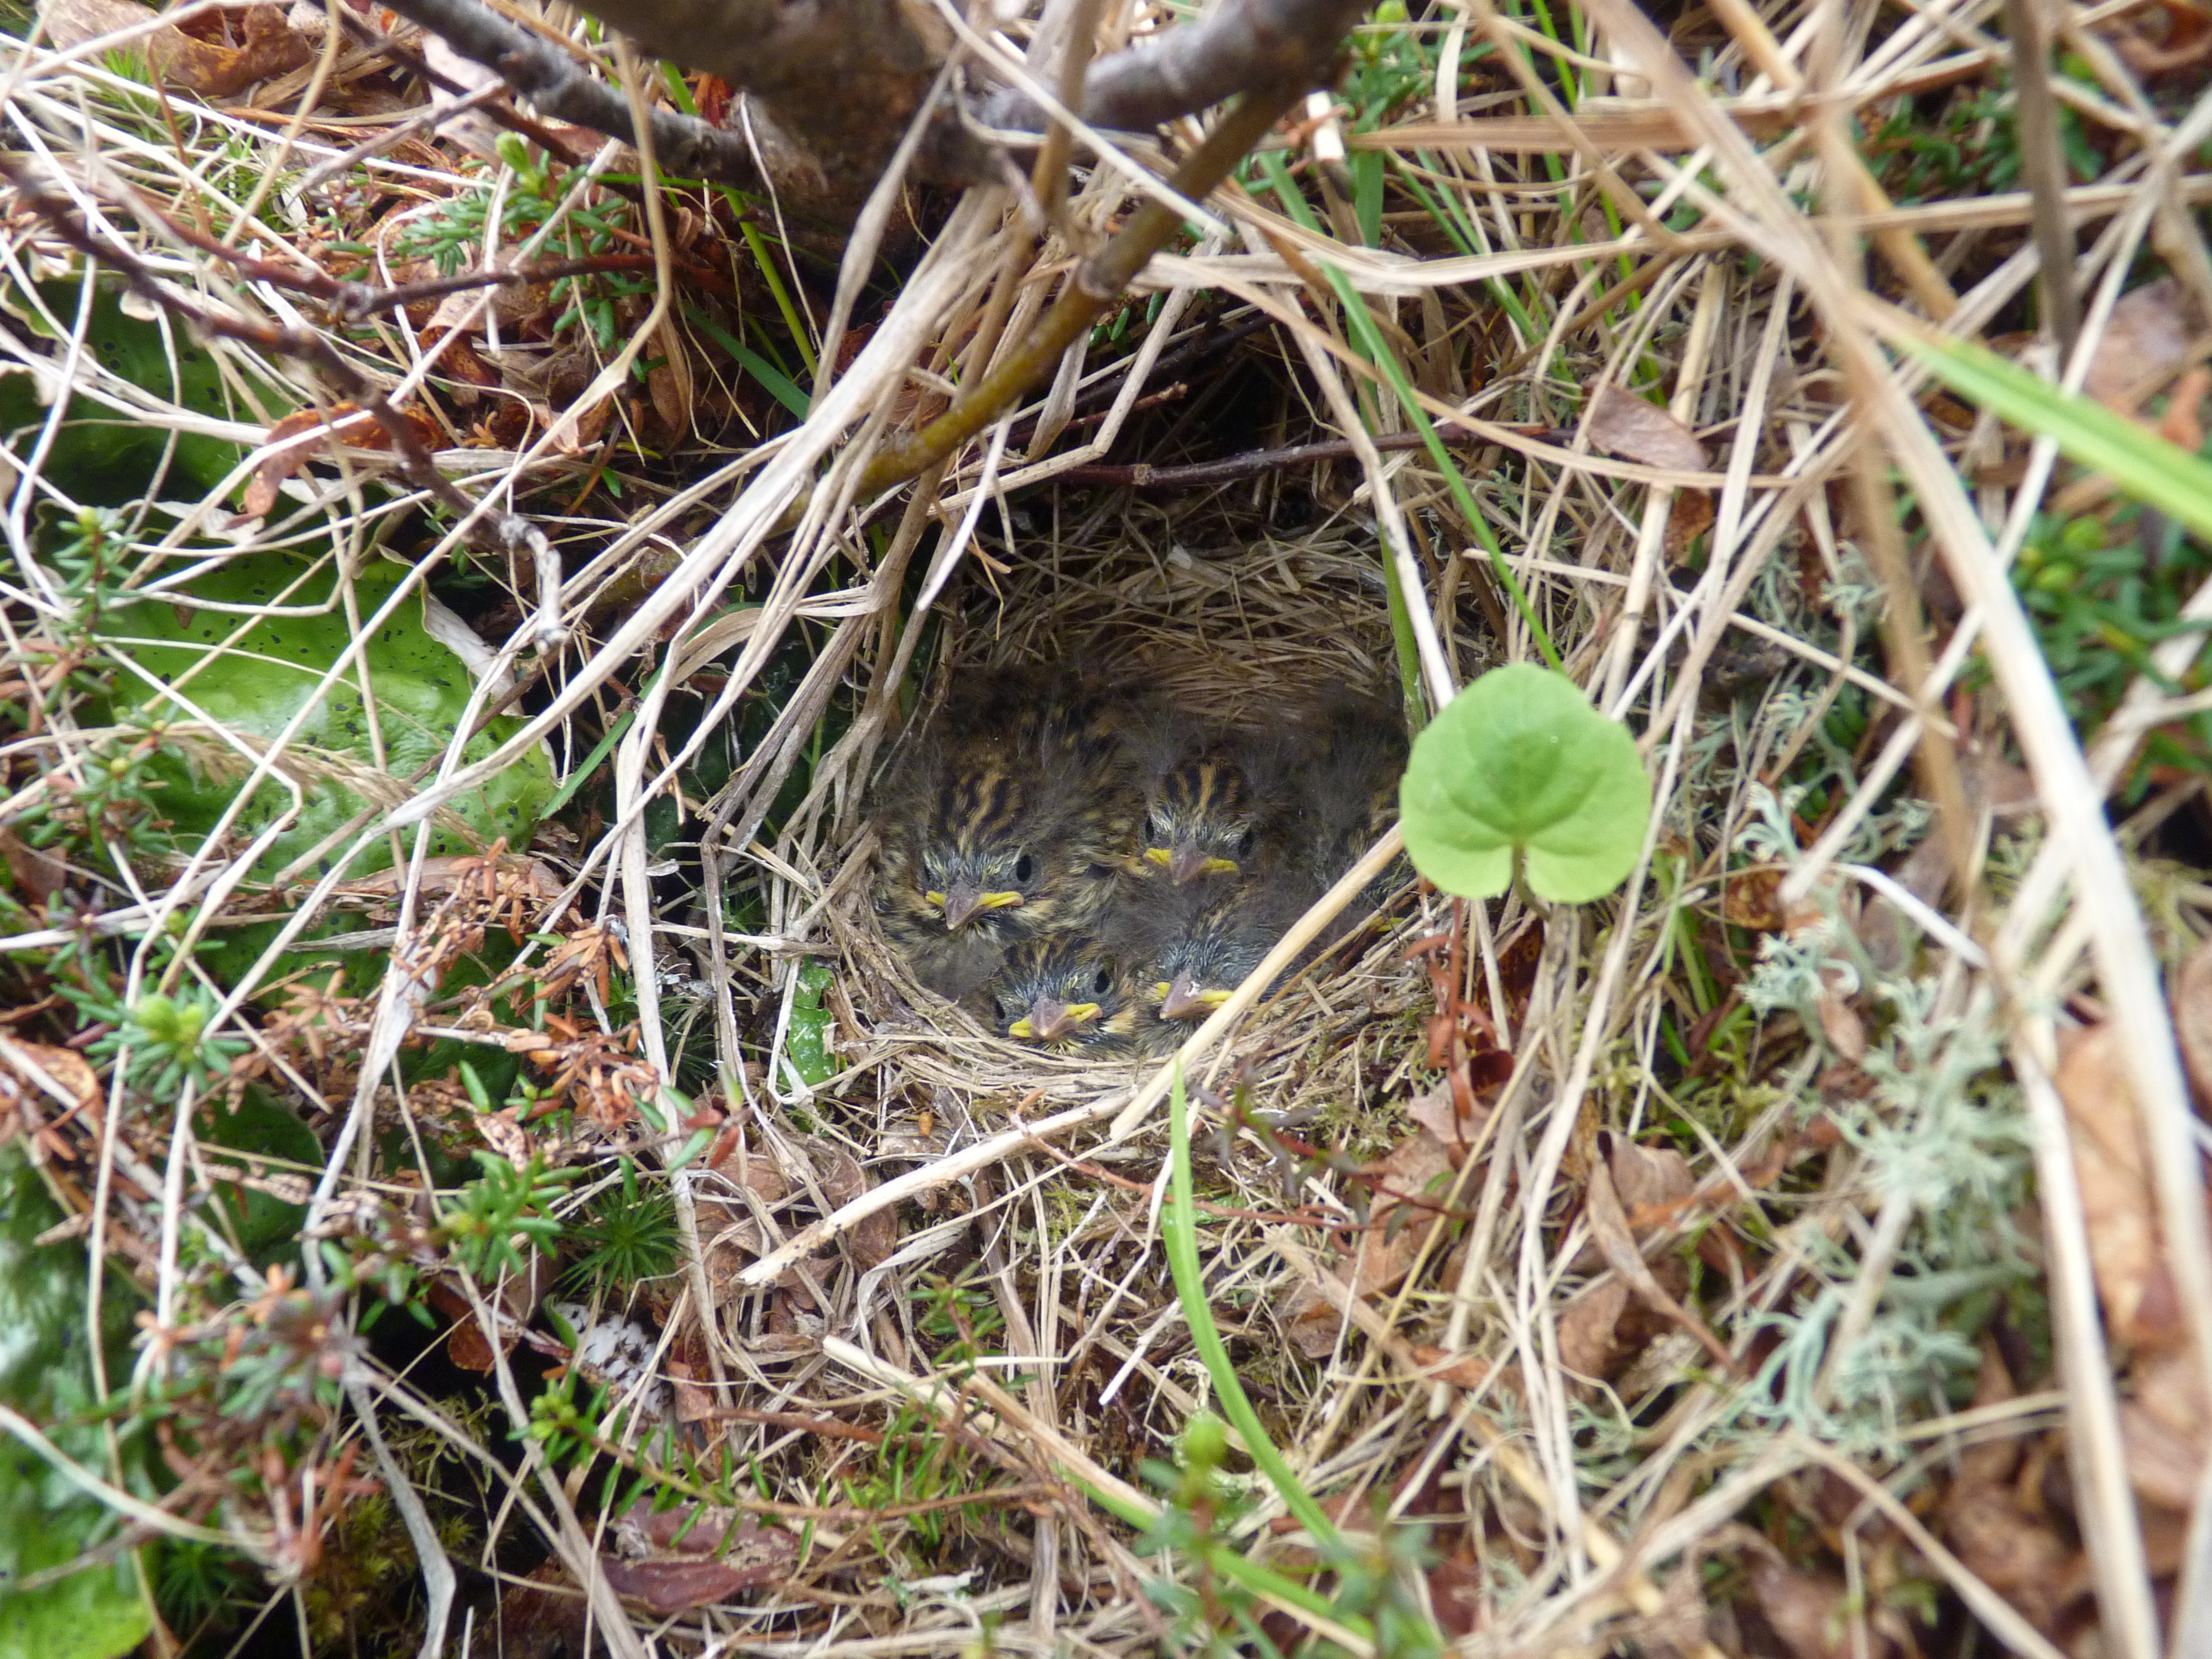 By delaying mowing till after nesting season and preventing disturbance by people and domestic animals, we can protect nesting grassland birds like the Savannah Sparrow. <a href="https://www.flickr.com/photos/usfws_alaska/14072725382/" target="_blank" >Photo</a>: Kristine Sowl, USFWS/<a href="https://creativecommons.org/licenses/by-nc-nd/2.0/" target="_blank" >CC BY-NC-ND 2.0</a>